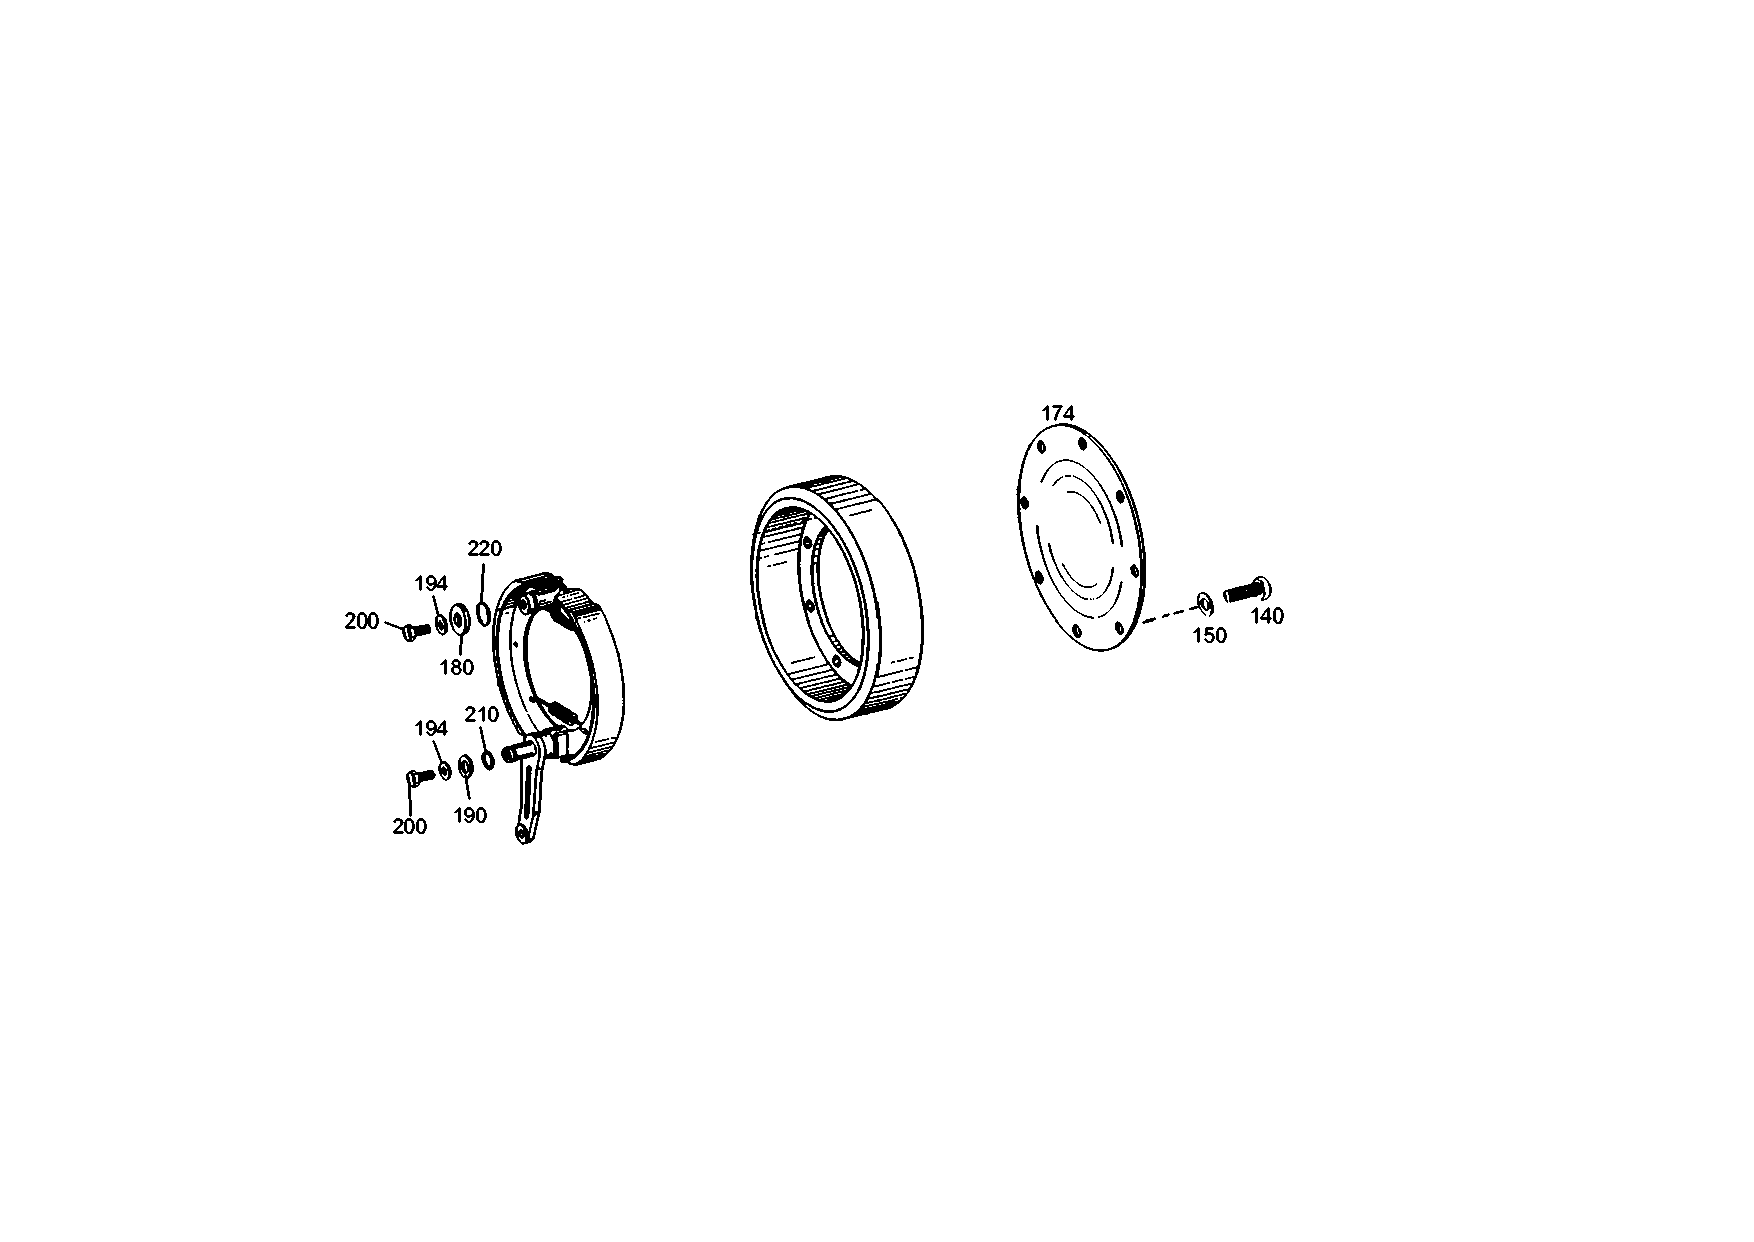 drawing for MOXY TRUCKS AS 505883 - WASHER (figure 5)